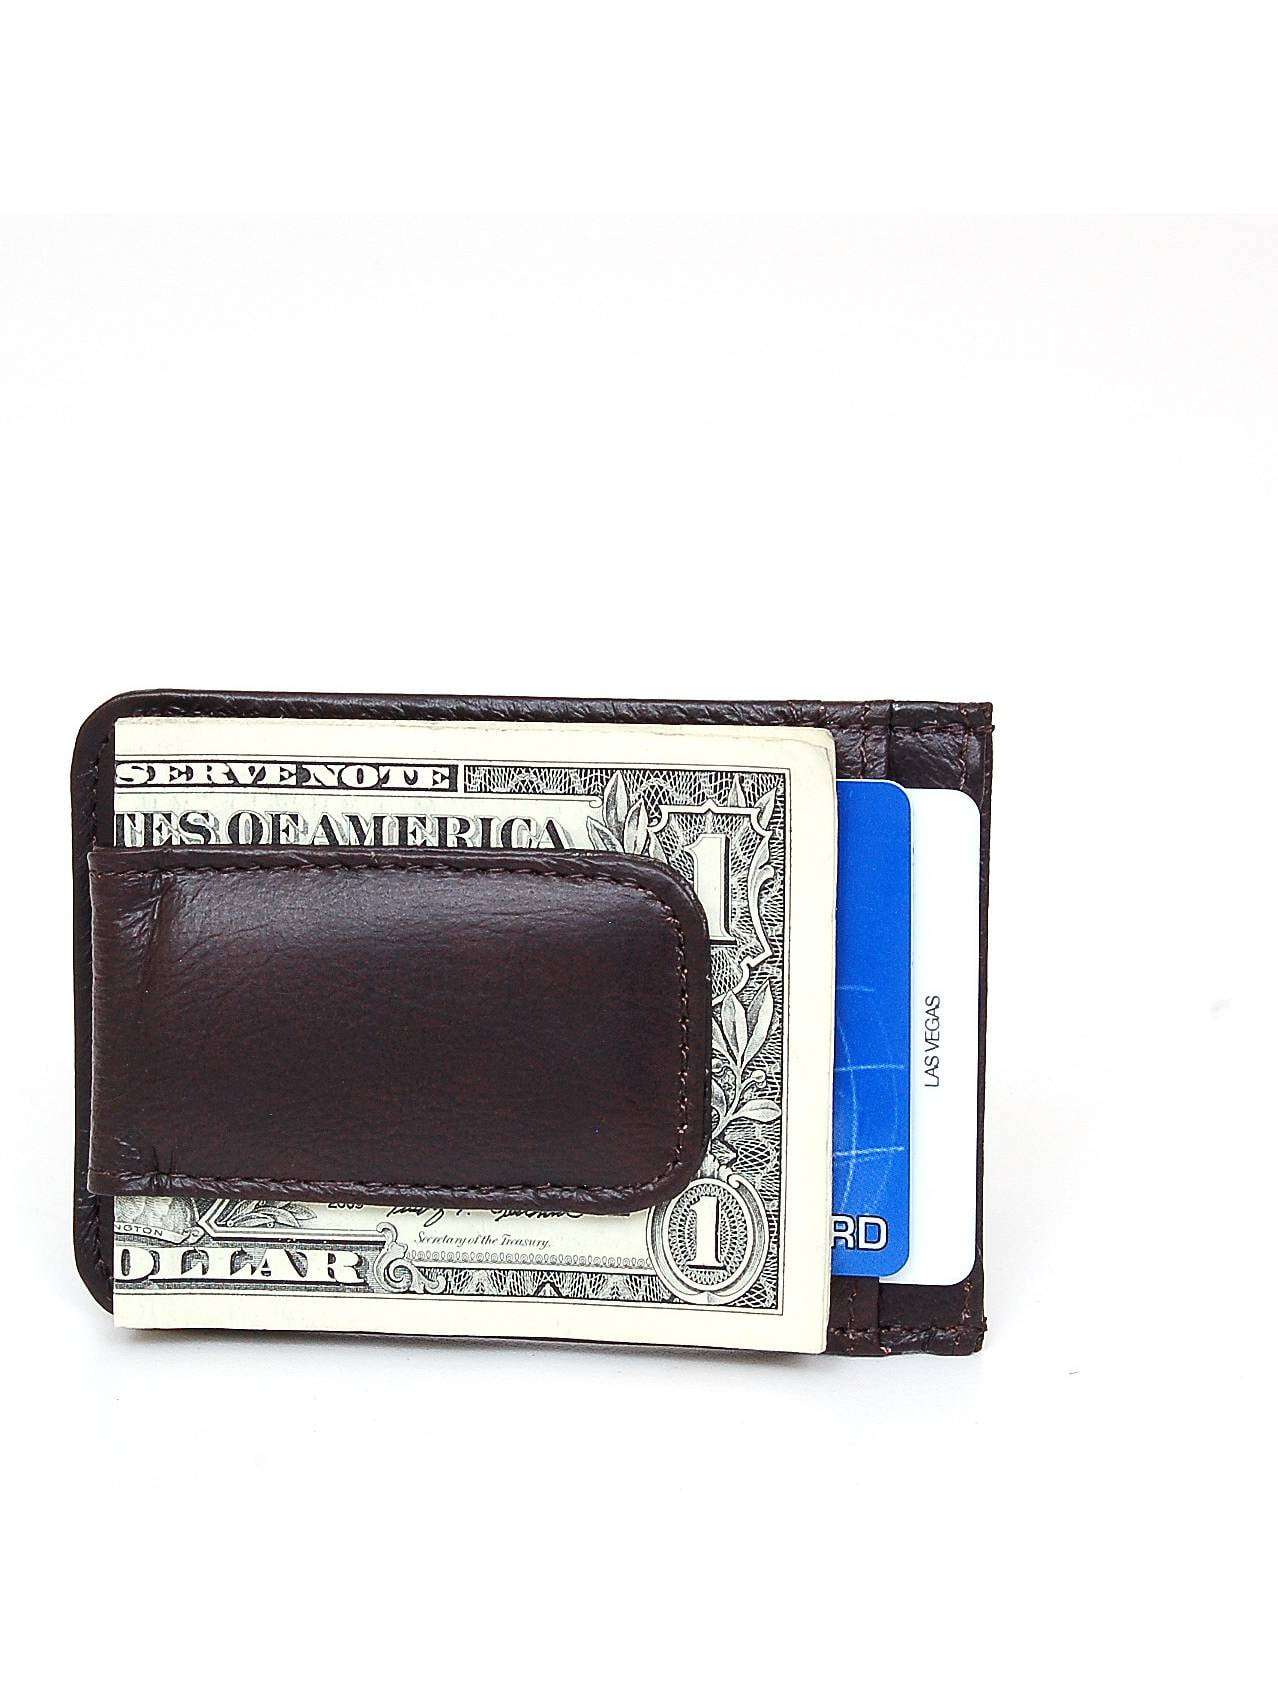 GBSELL Mens Leather Magic Credit Card ID Holder Money Clip Wallet 